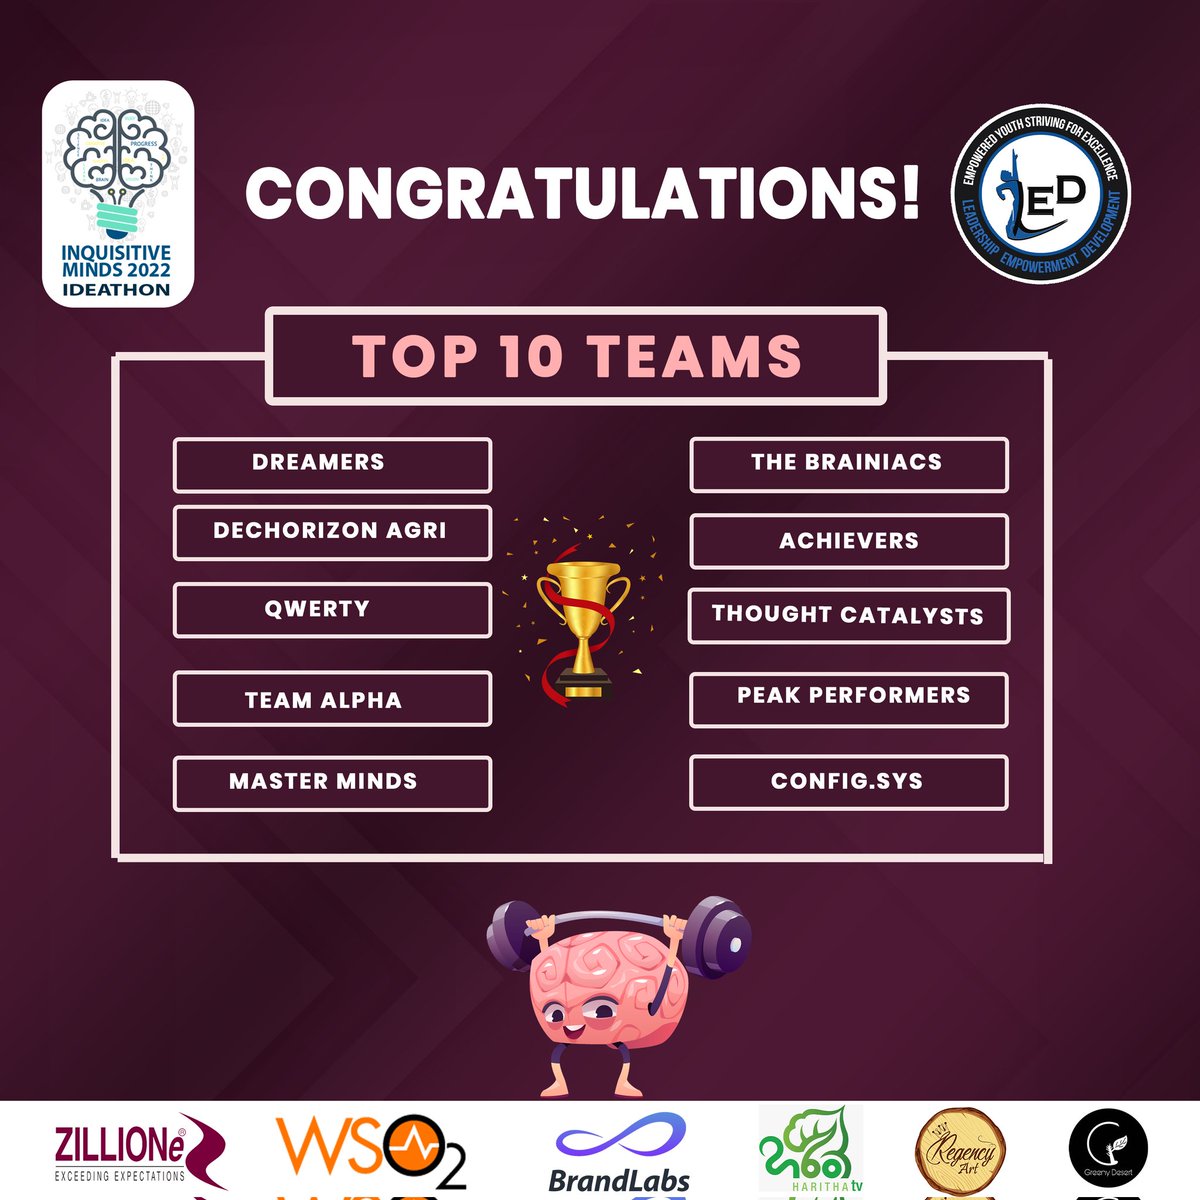 Congratulations to the top ten finalists who have completed the first challenge of the Inquisitive Minds 2022 successfully.

The best is yet to come!

STAY TUNED.

#InquisitiveMinds_LEDKLN #Ideathon2022 #Innovations #BusinessSolutions